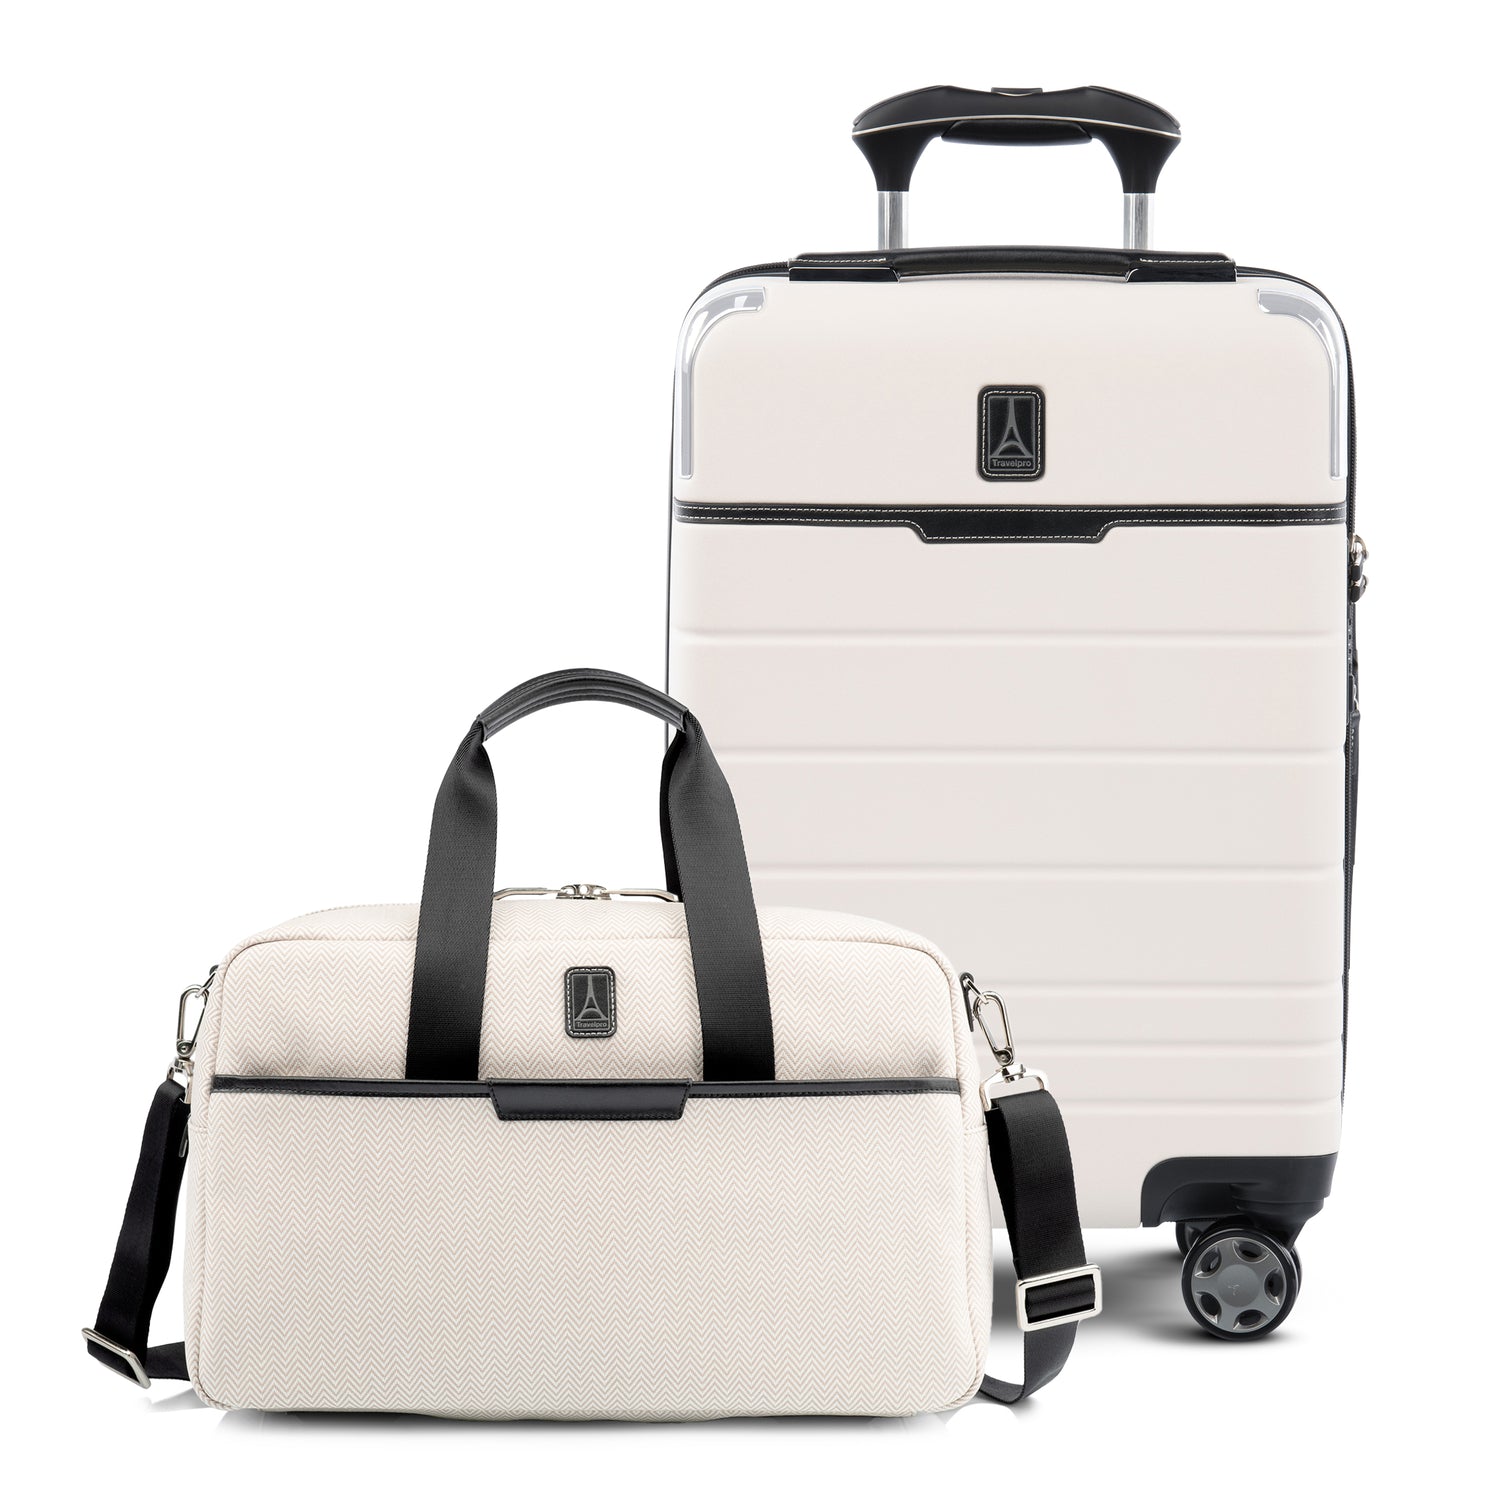 Travelpro x Travel + Leisure Compact Carry-On Spinner & Underseat Tote Bag Luggage Set in White Sand | Hands-Free Mobility | Travel Suitcase